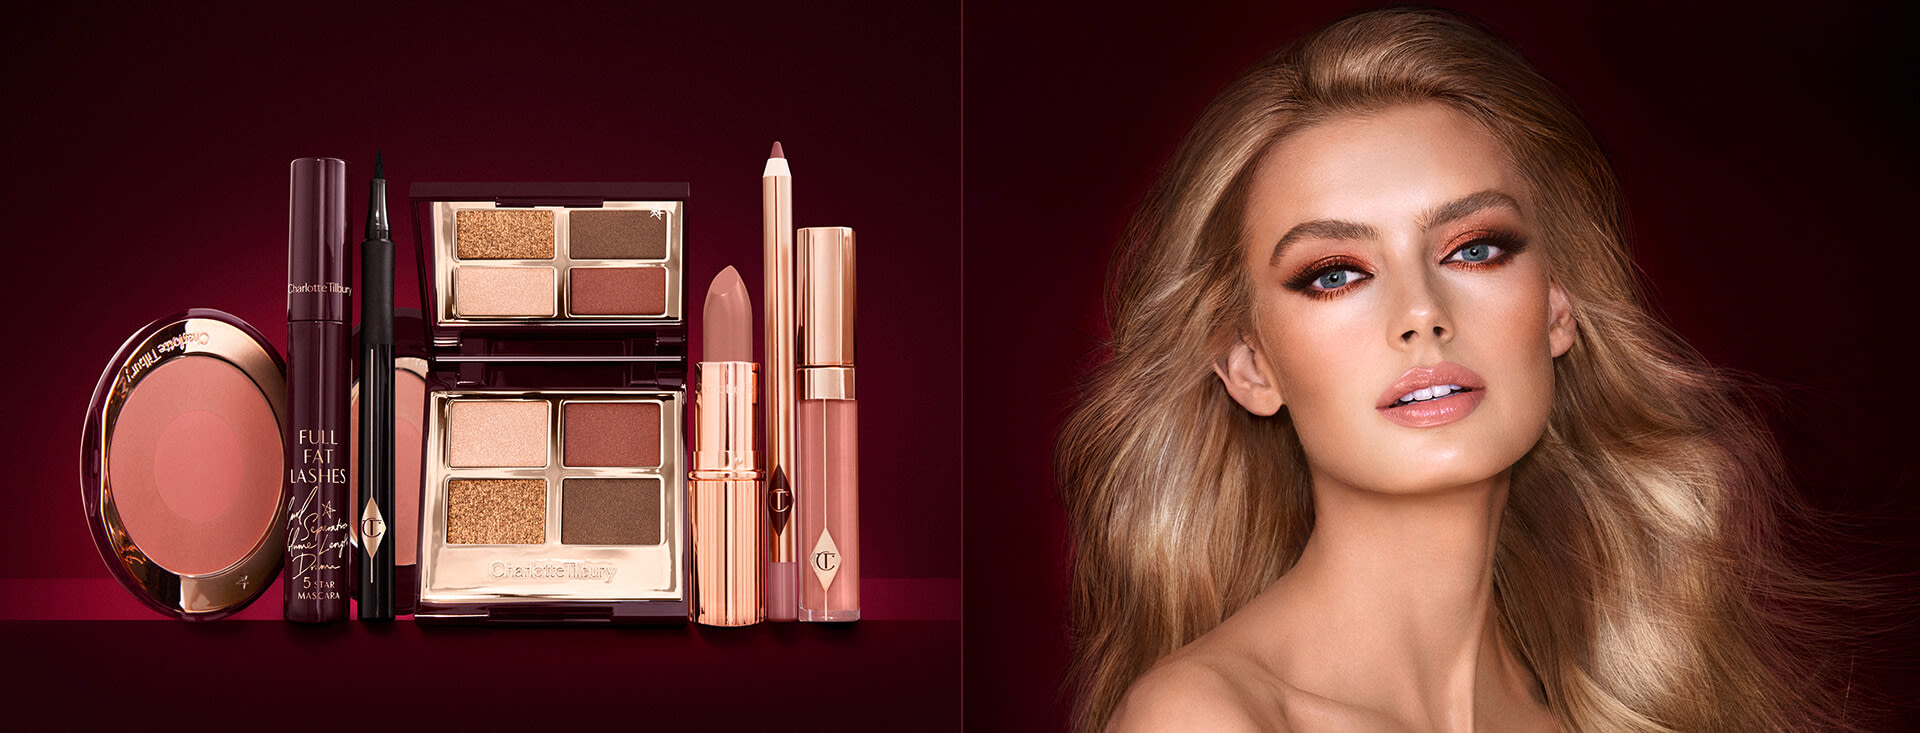 A fair-tone model with blue eyes wearing smokey brown and gold eye makeup with warm pink blush and glossy nude-pink lips next to a makeup kit that includes an open, mirrored-lid eyeshadow palette in matte and shimmery brown and gold shades, an open black eyeliner pen, a mascara in a dark-crimson colour scheme, a berry-rose lipstick with a matching lip liner pencil, nude pink lip gloss, and an open two-tone blush in warm pink. 